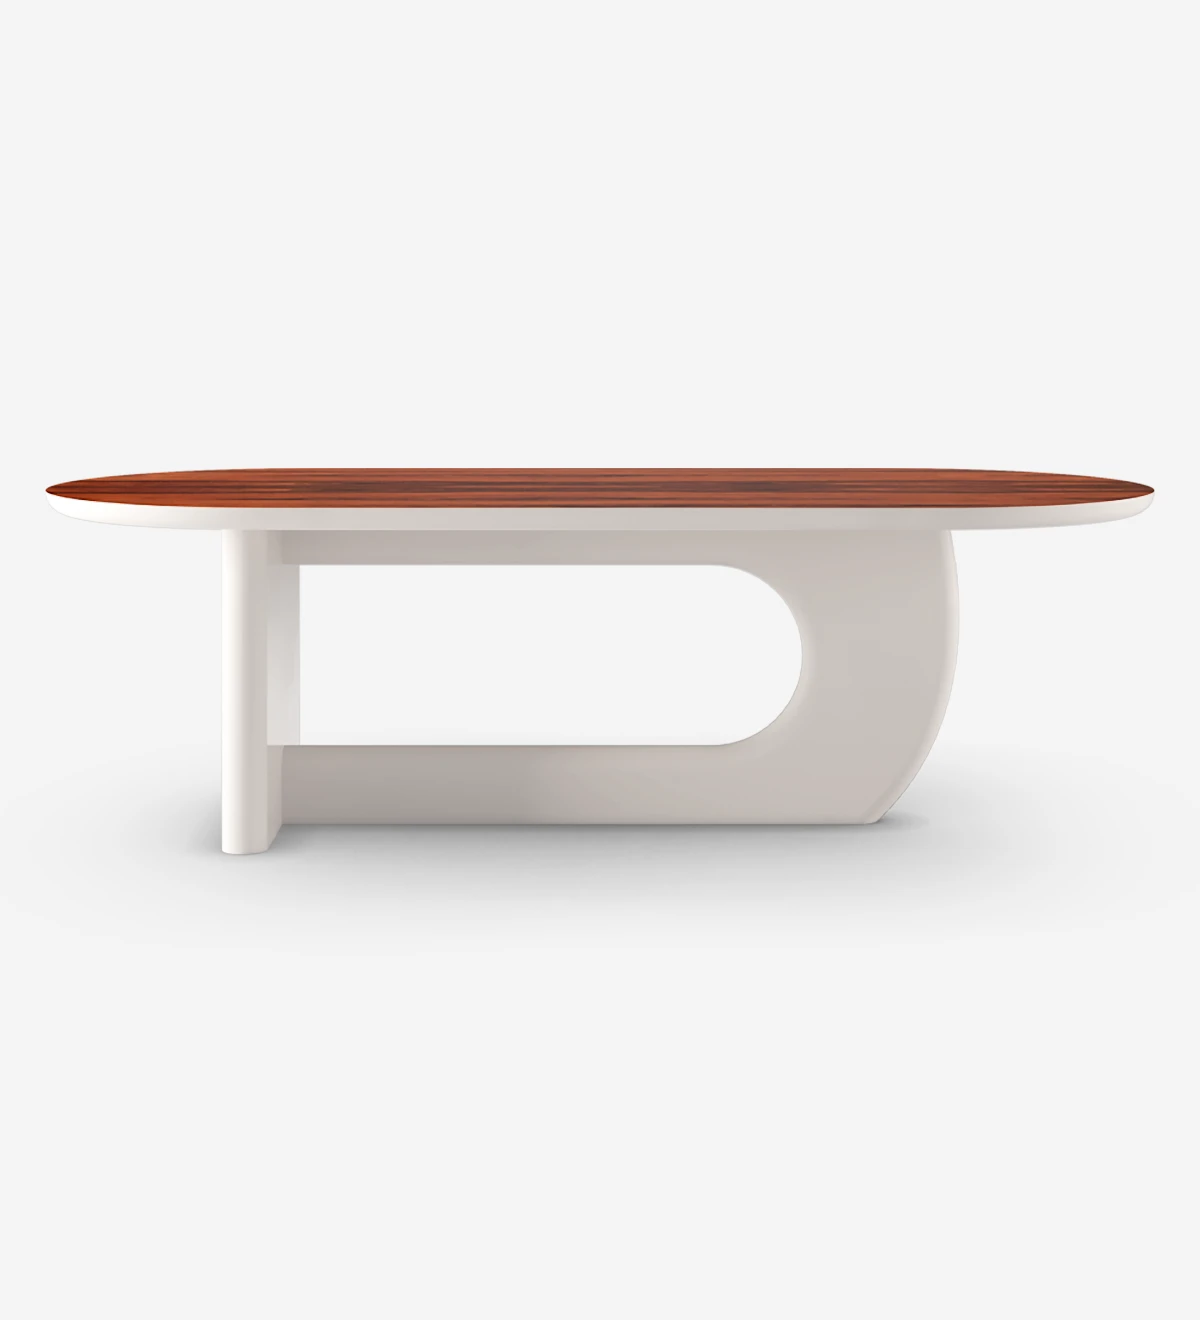 Oval dining table with high gloss palissander top and pearl lacquered foot.